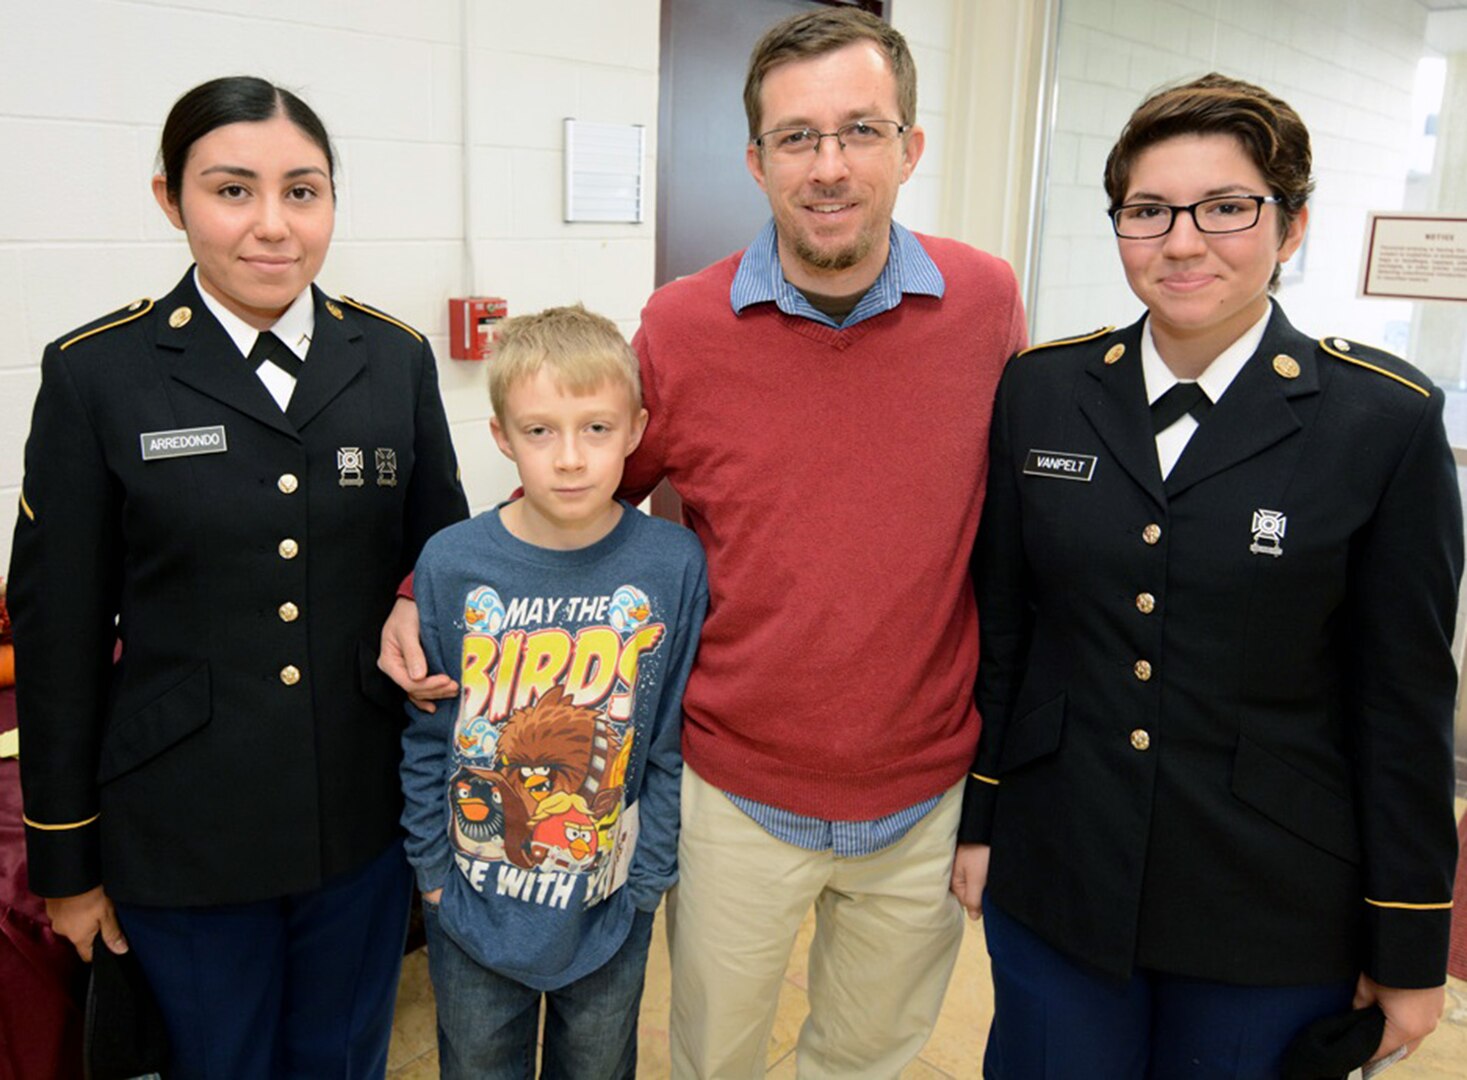 Jeff Wheatcraft with his son, Nelson, hosting Pvt. Adrianna Arredondo from Albuquerque, N.M.; and Pvt. Destiny Vanpelt from Michigan. This is the 10th year the Wheatcraft family has hosted Soldiers for Thanksgiving.